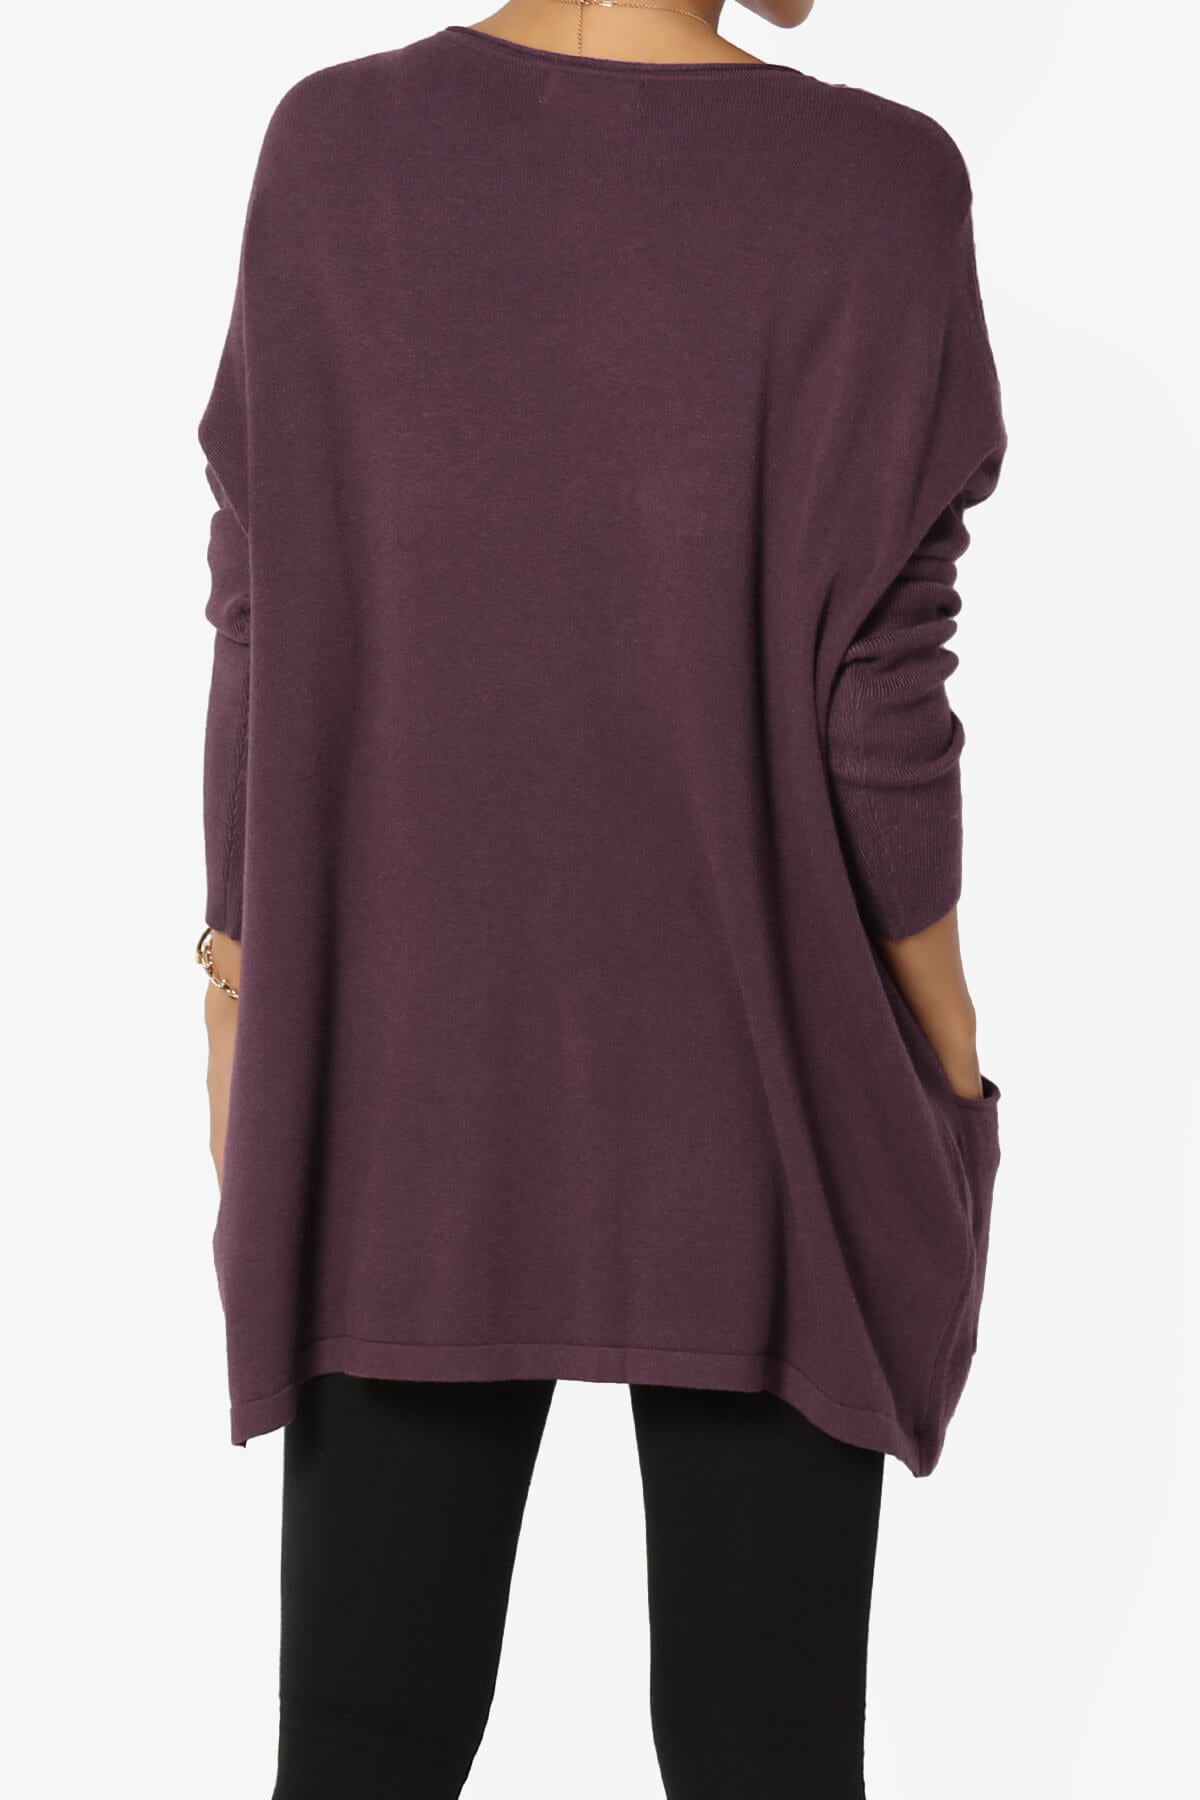 Load image into Gallery viewer, Brendi Super Soft Pocket Oversized Sweater DUSTY PLUM_2
